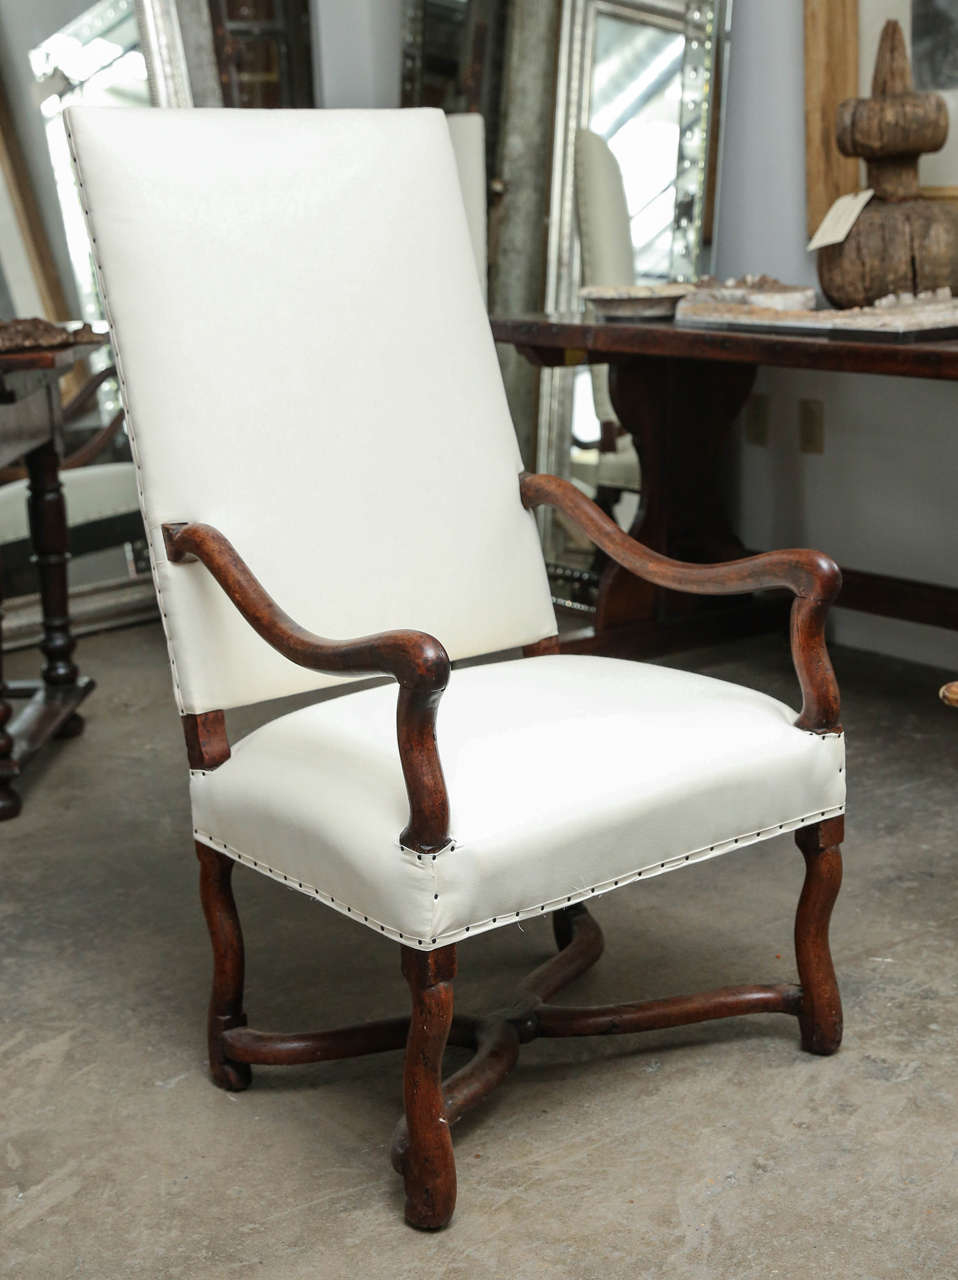 18th century Walnut Os De Moutan upholstered Louis XIII chair with arms. Beautiful stretchers and patina.